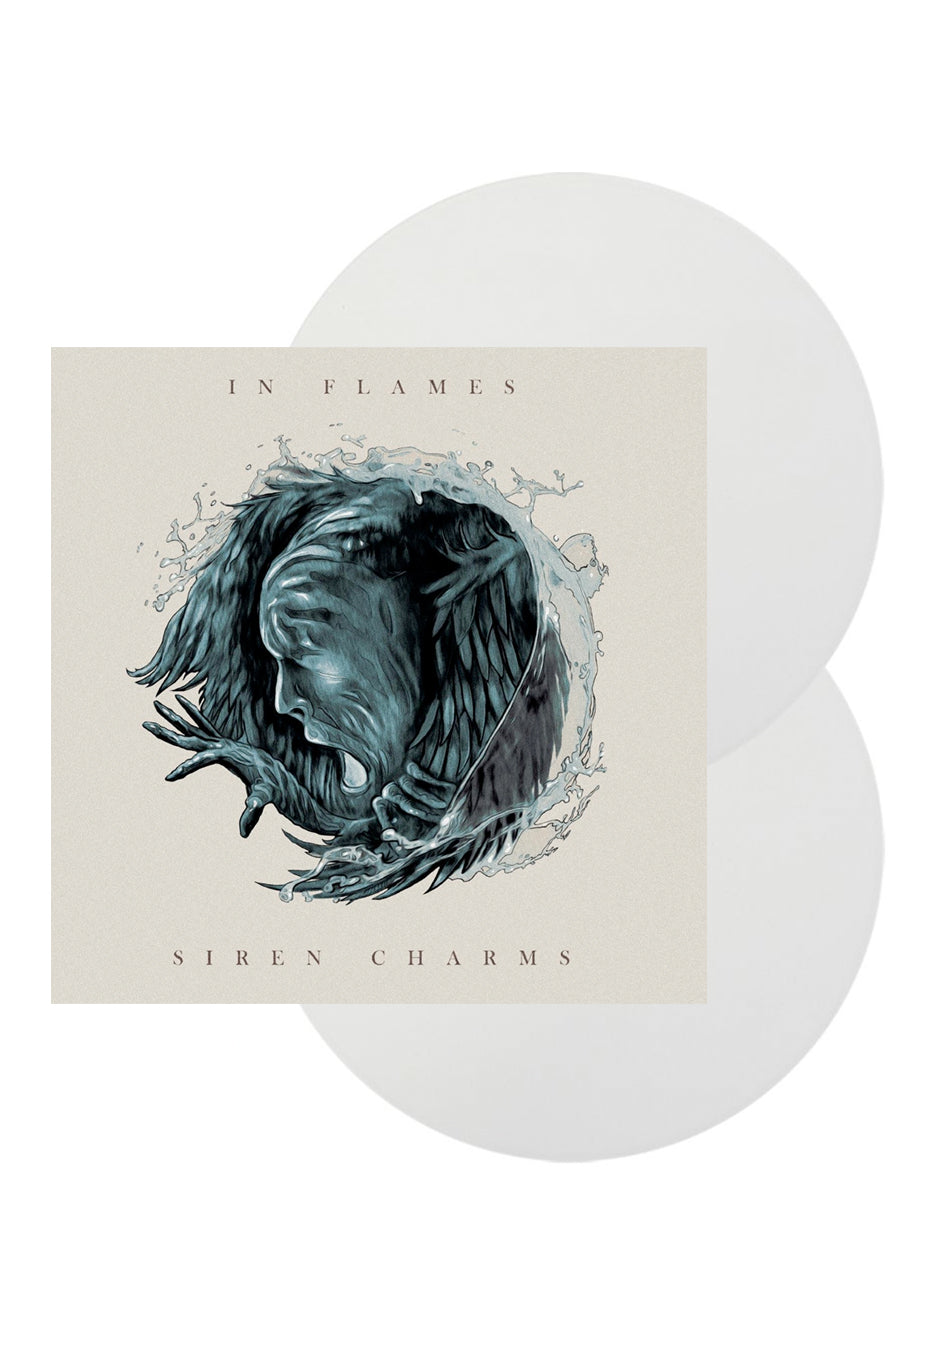 In Flames - Siren Charms - Colored 2 Vinyl